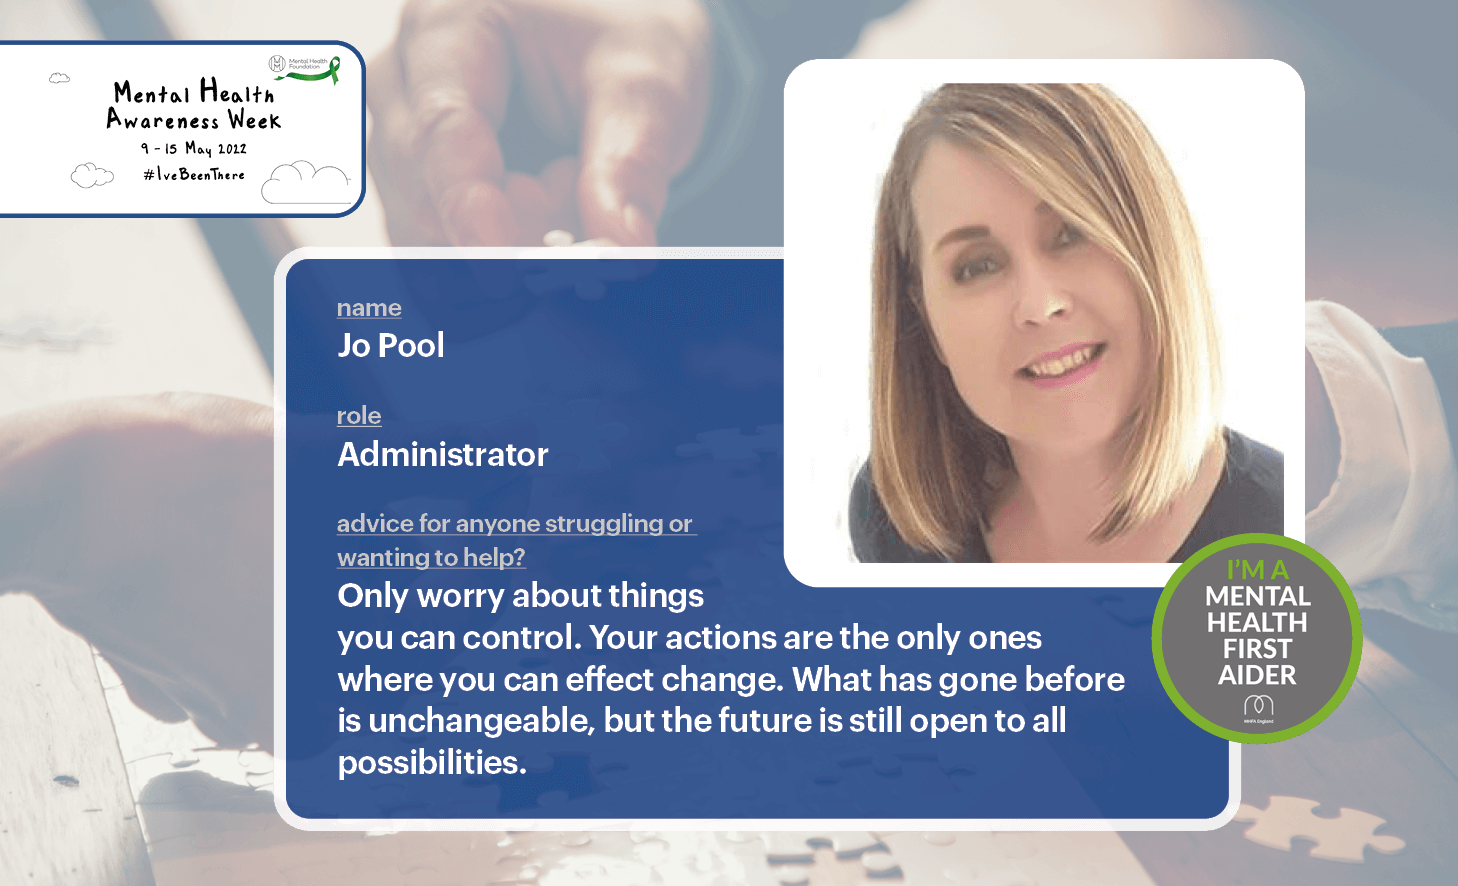 Advice from our Mental Health First Aiders - Jo Pool, Administrator